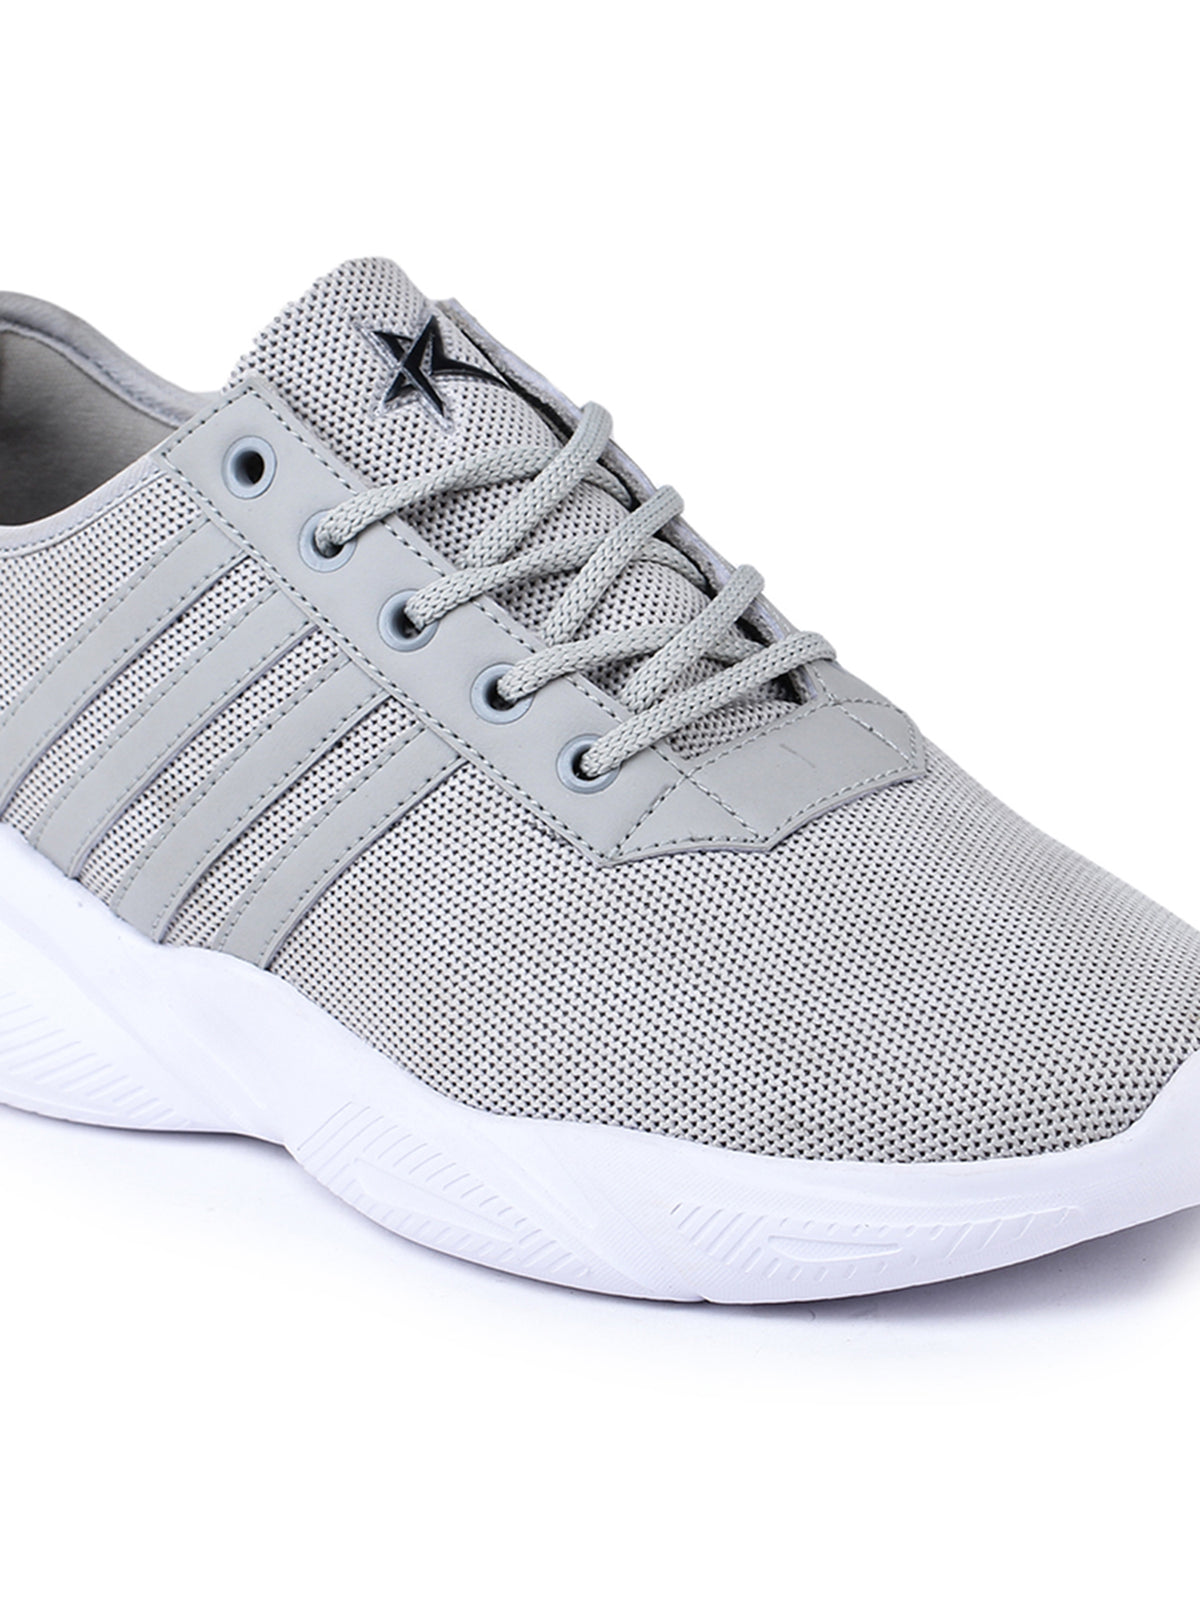 Grey Solid Mesh Lace Up Lifestyle Casual Shoes For Men